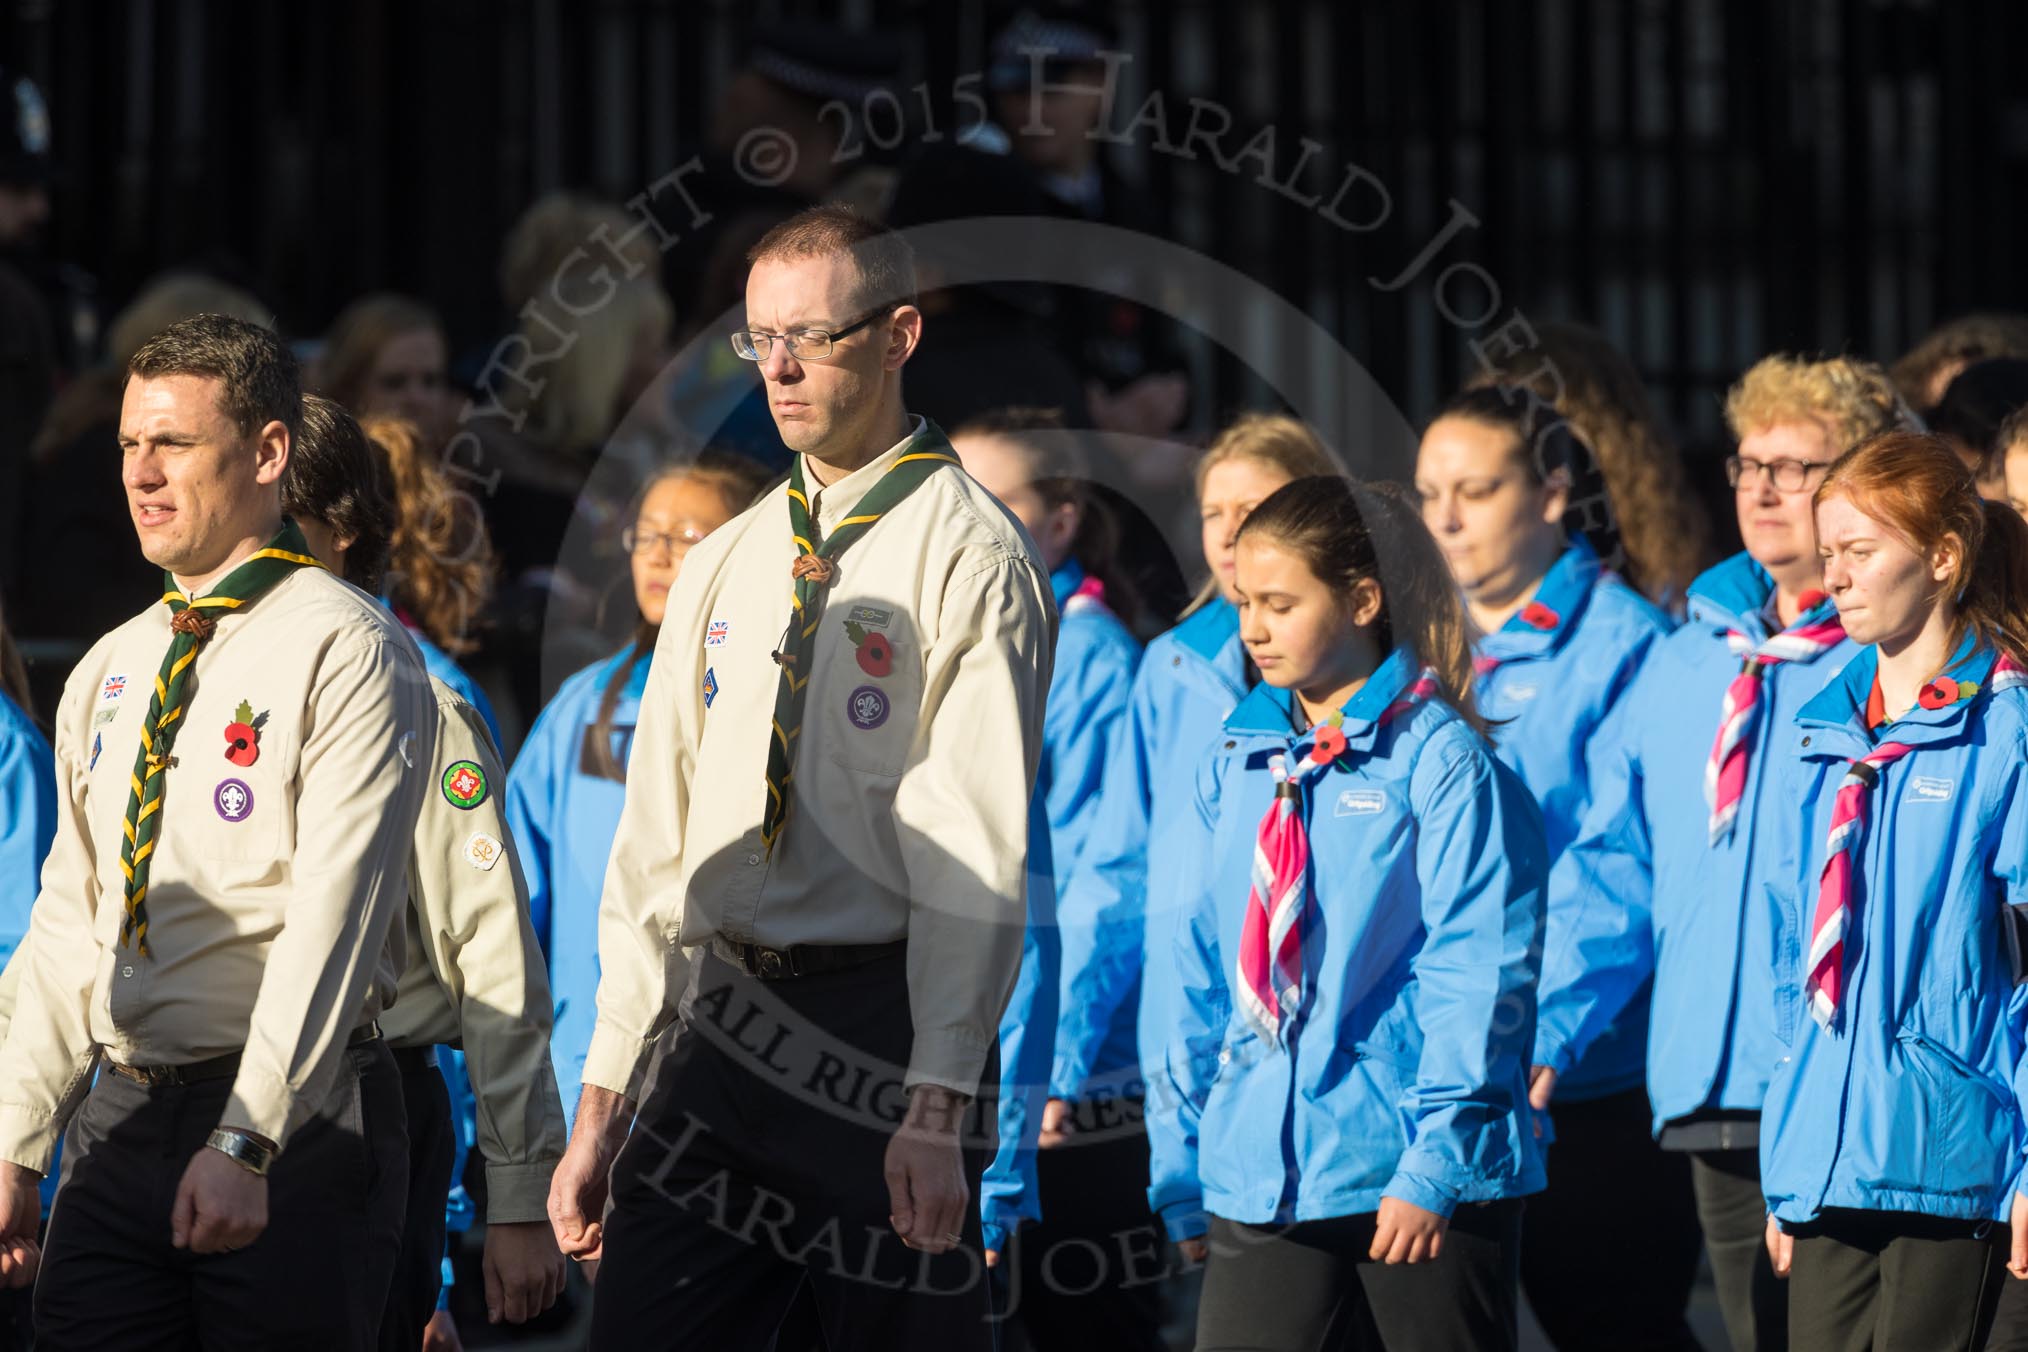 March Past, Remembrance Sunday at the Cenotaph 2016: M33 Scout Association.
Cenotaph, Whitehall, London SW1,
London,
Greater London,
United Kingdom,
on 13 November 2016 at 13:18, image #2853